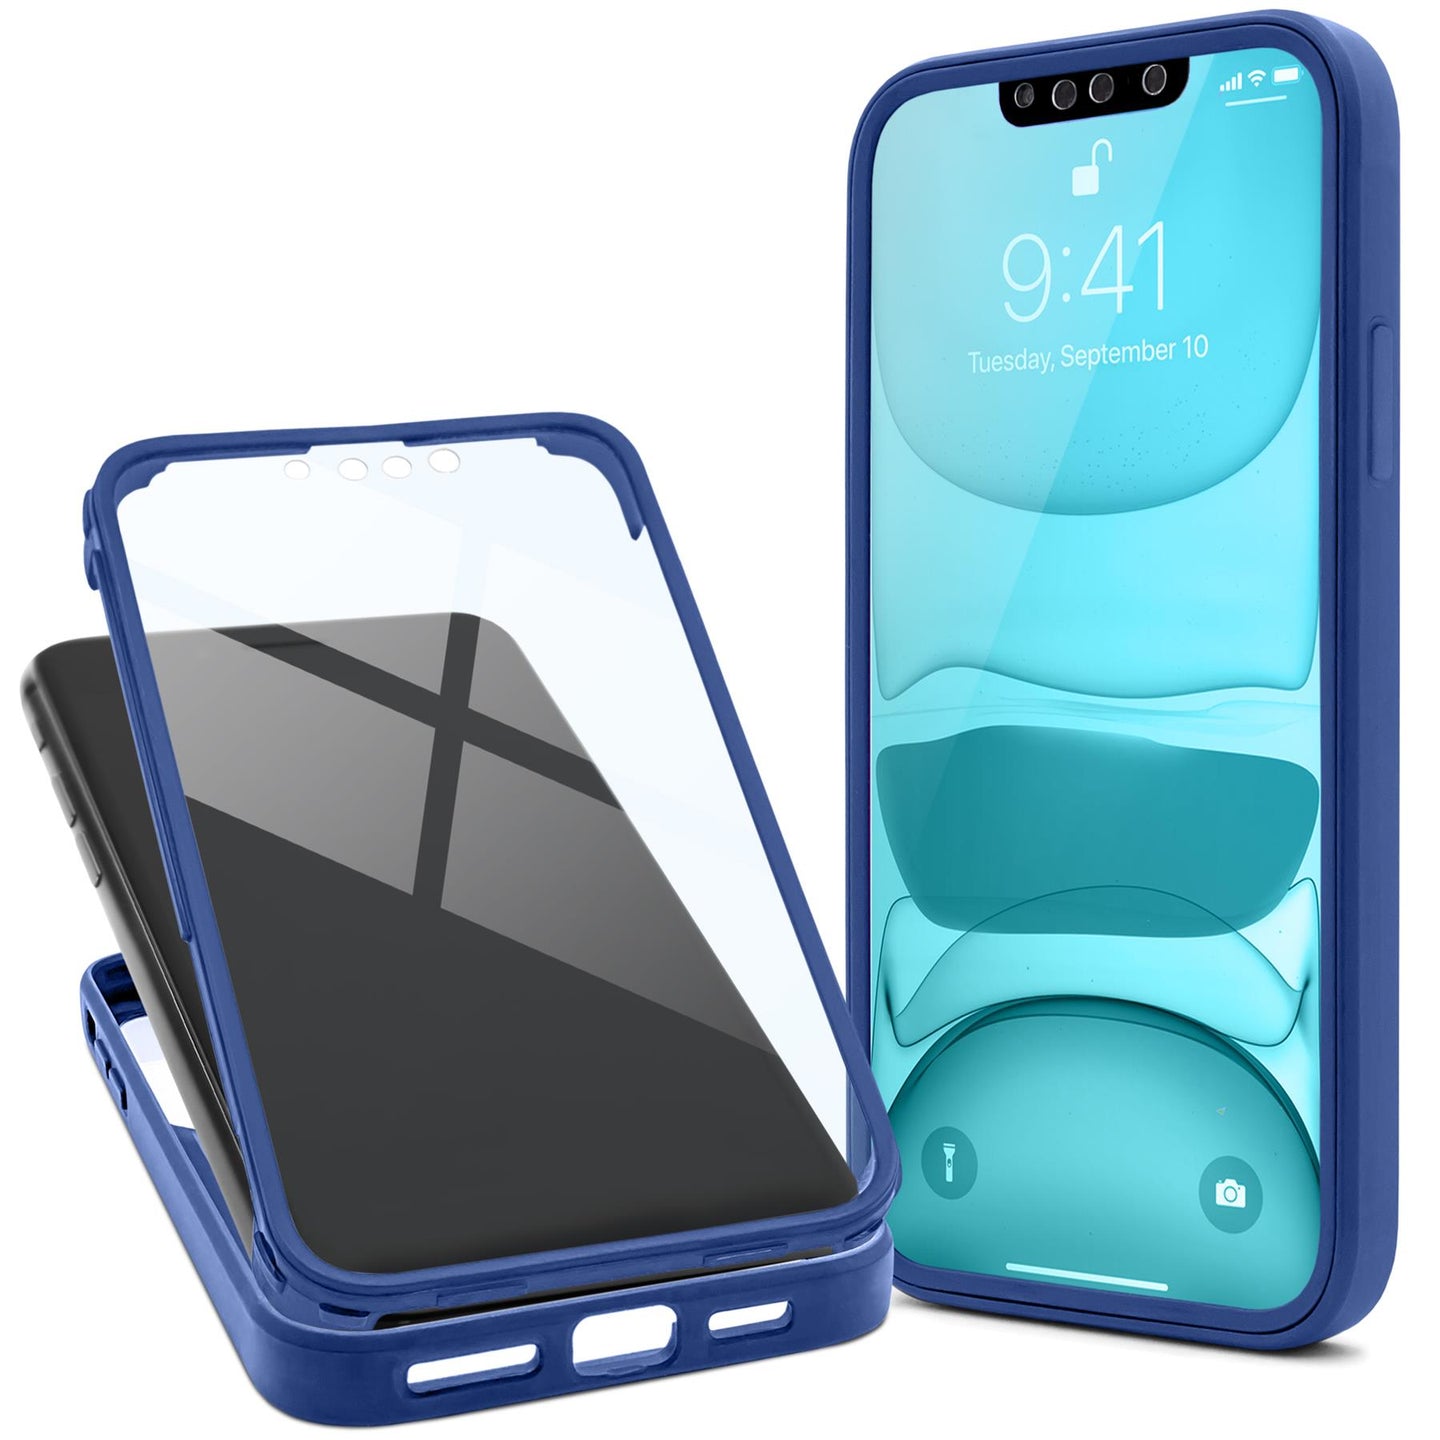 Moozy 360 Case for iPhone 13 - Blue Rim Transparent Case, Full Body Double-sided Protection, Cover with Built-in Screen Protector